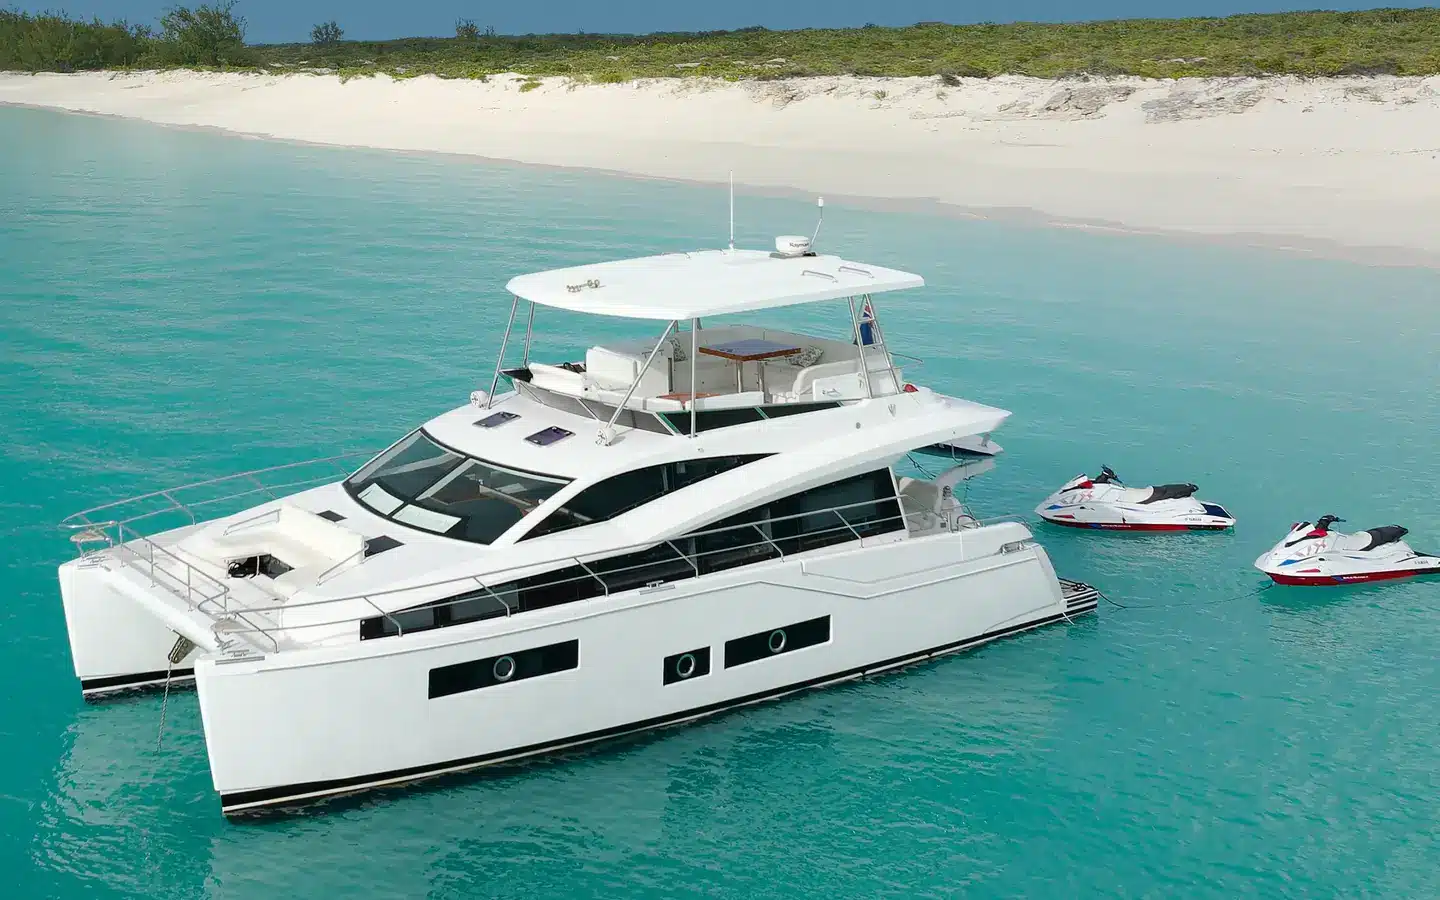 Boat and Yacht Sailing Experiences in Turks and Caicos